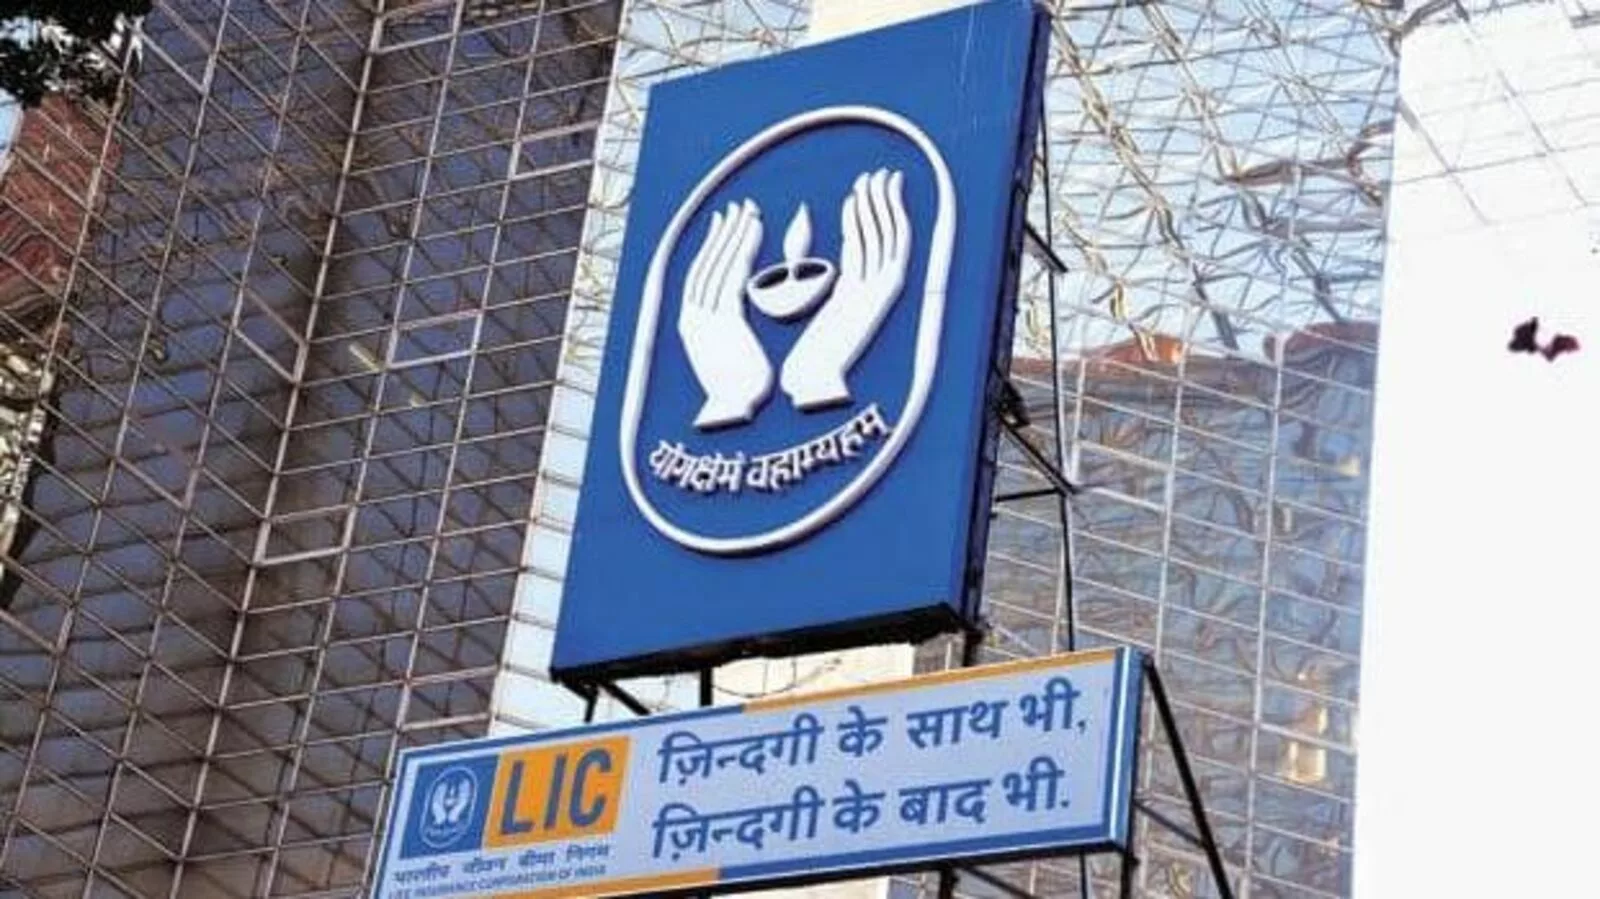 LIC receives ₹21,740 crore tax refund from Income Tax dept; remaining ₹3,700 crore awaited